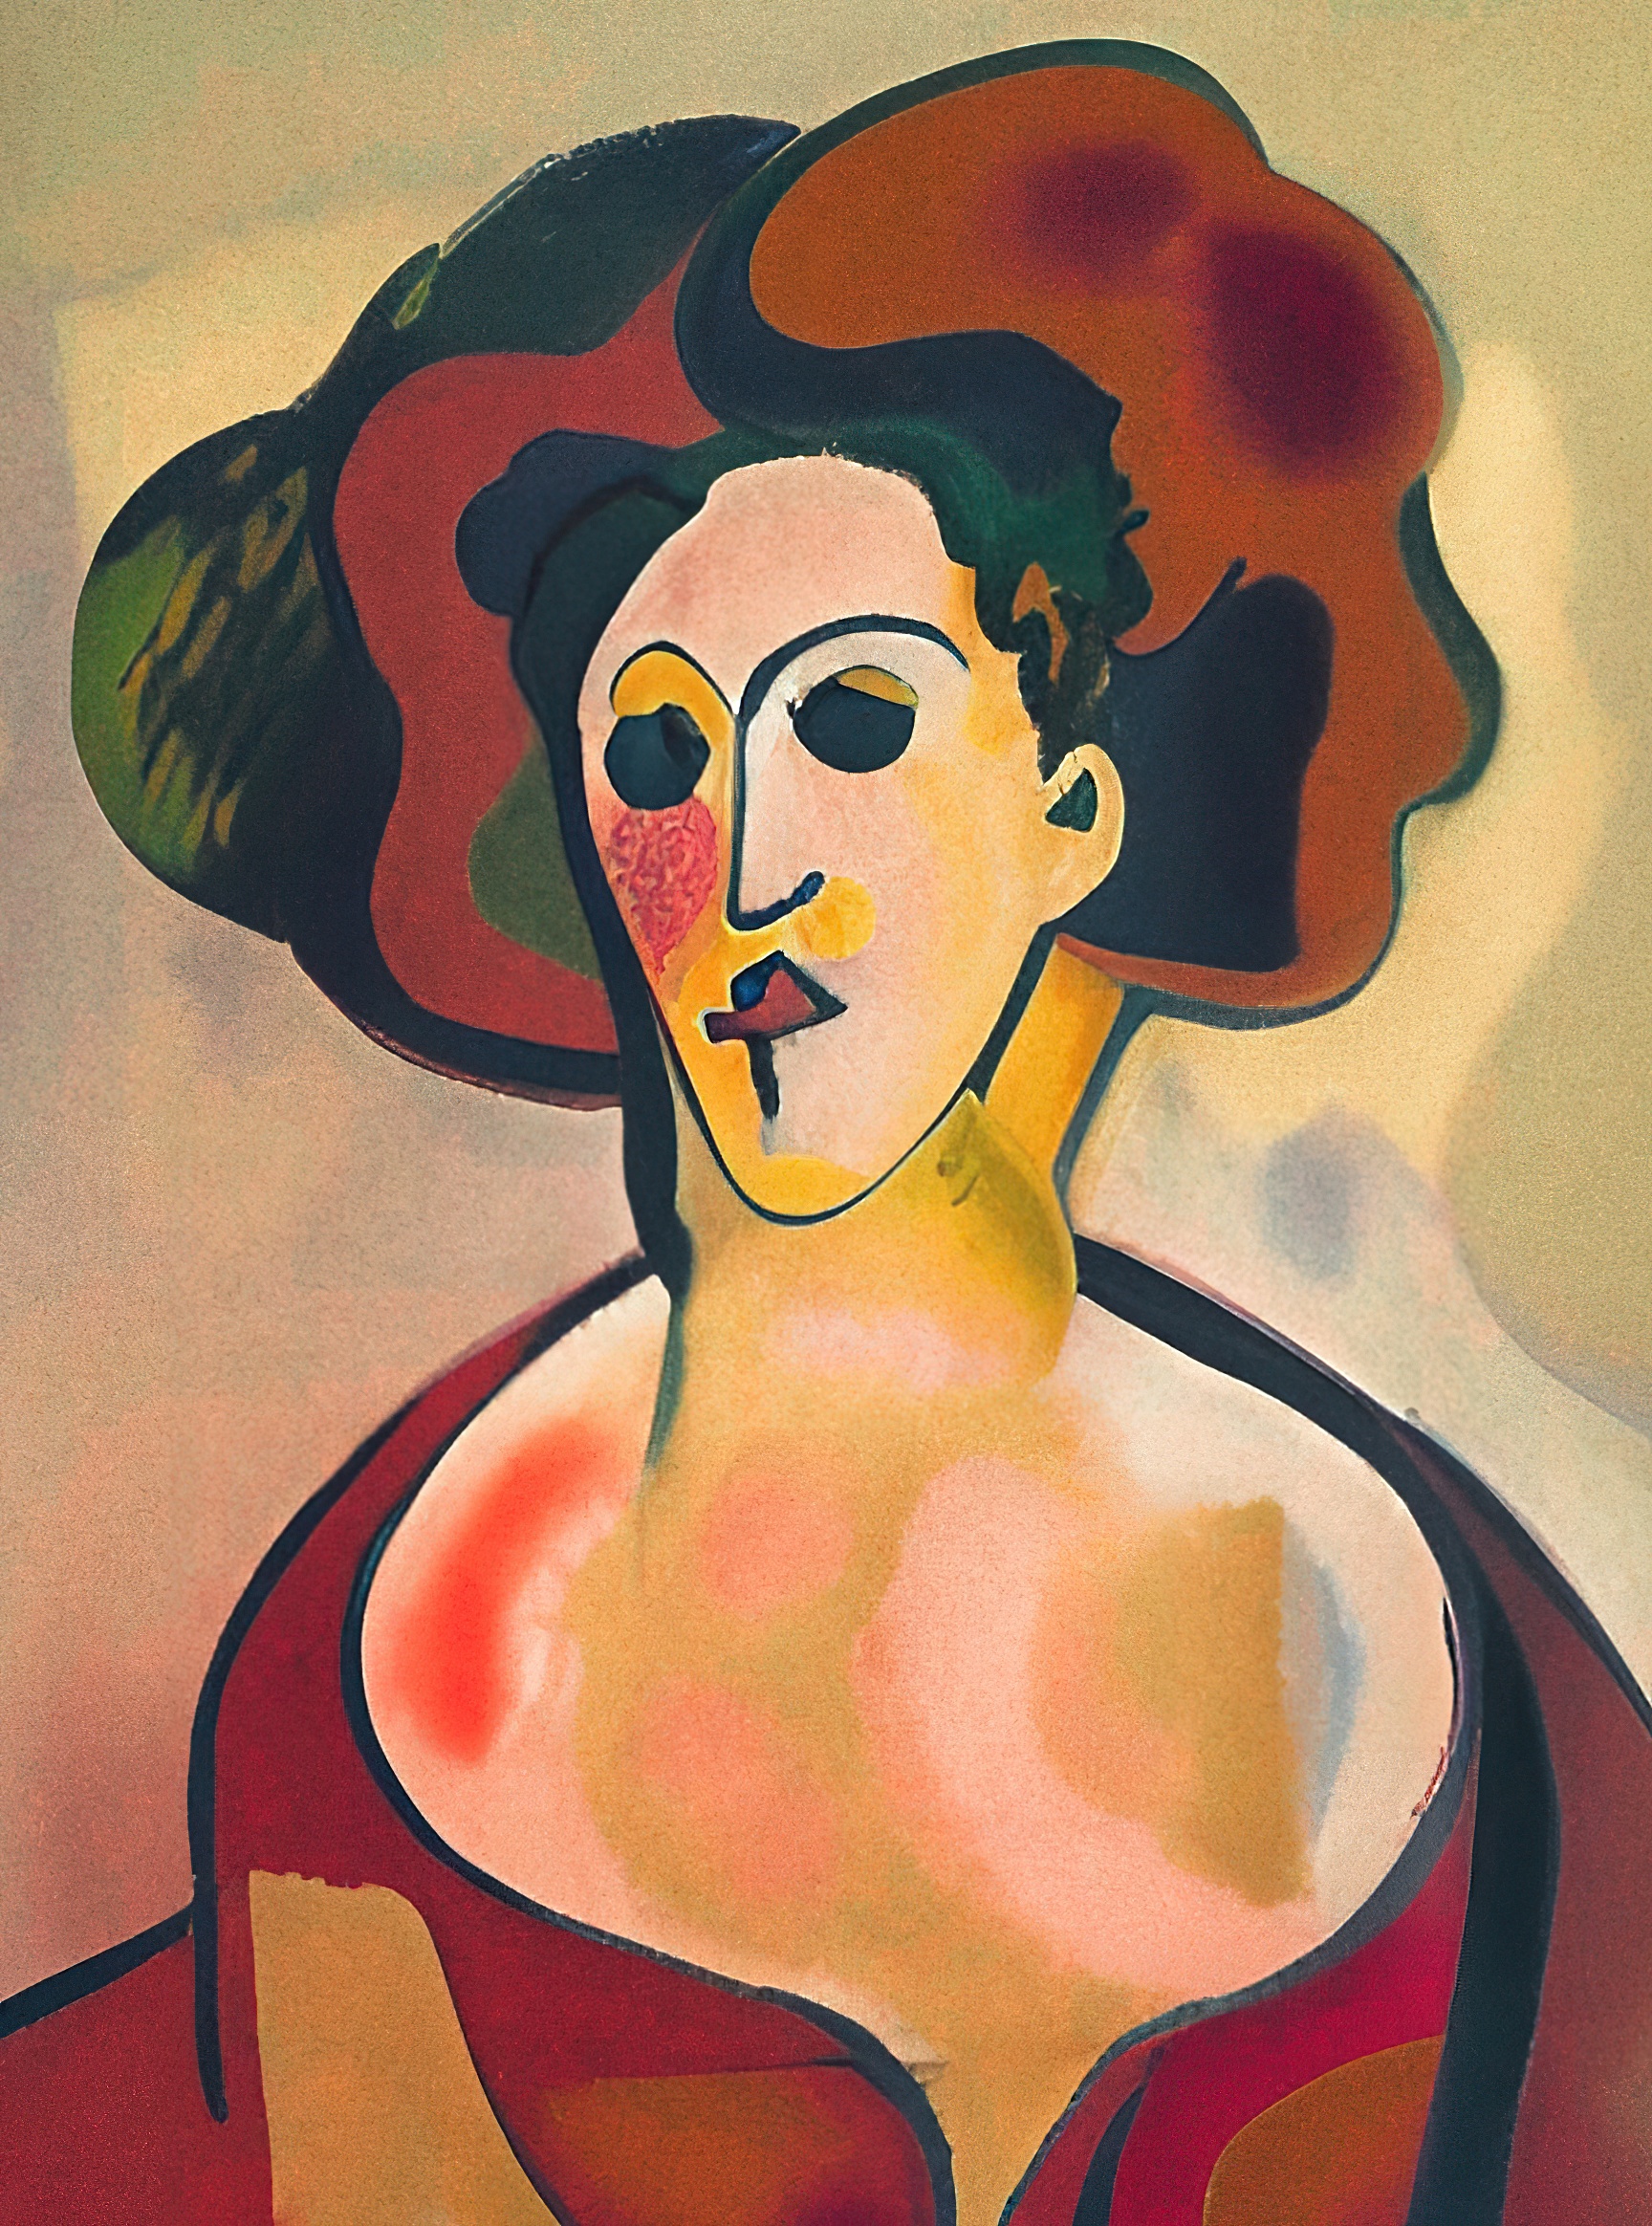 'Portrait of a Curly Woman' |Paolo Galleri|